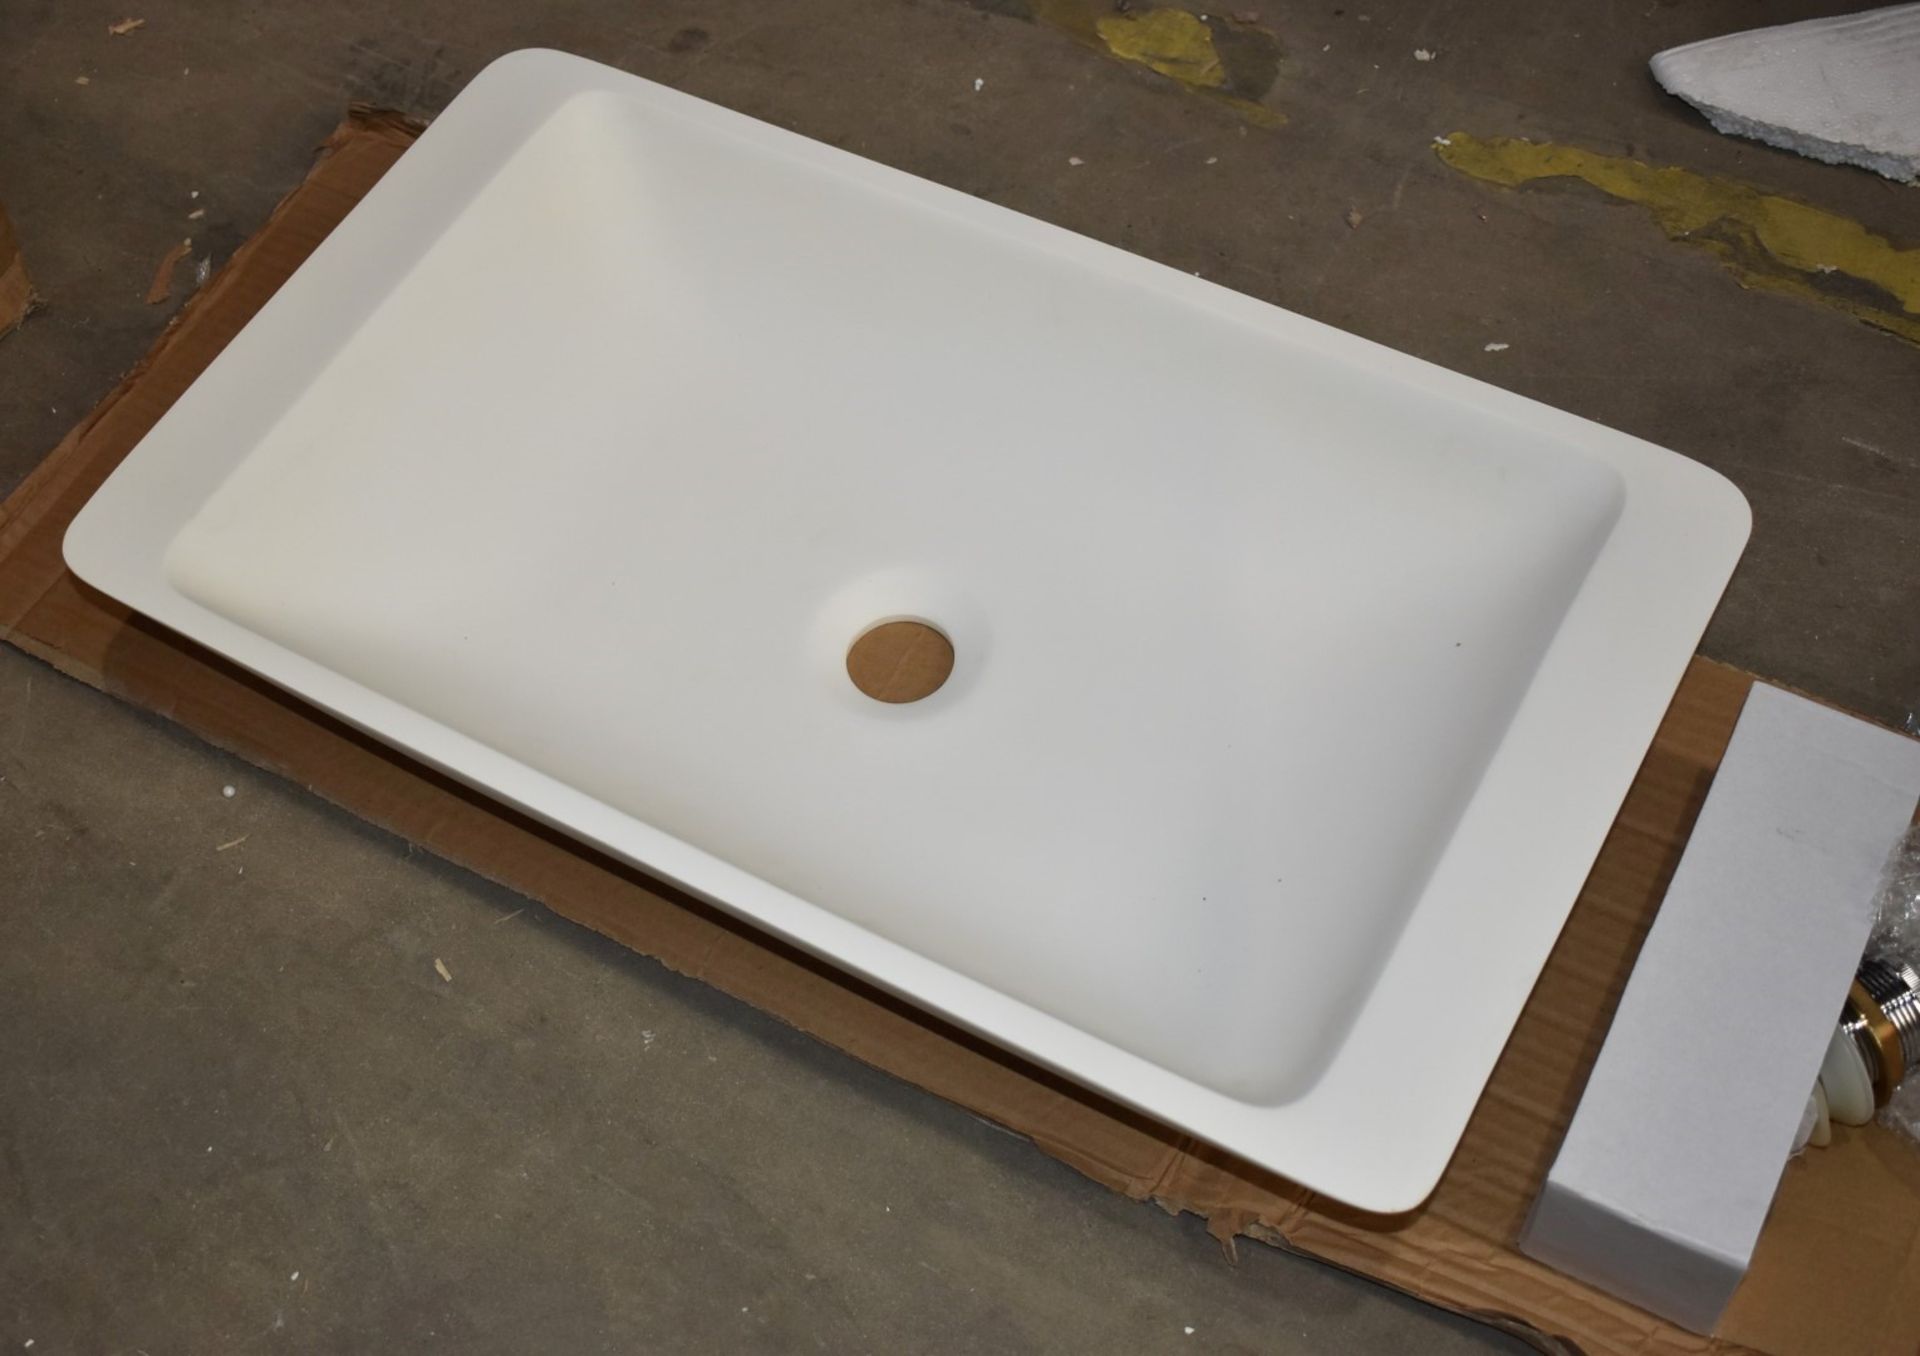 1 x Countertop Rectangular Wash Basin - Includes Slotted Pop Up Waste - New and Unused - H10 x W59 x